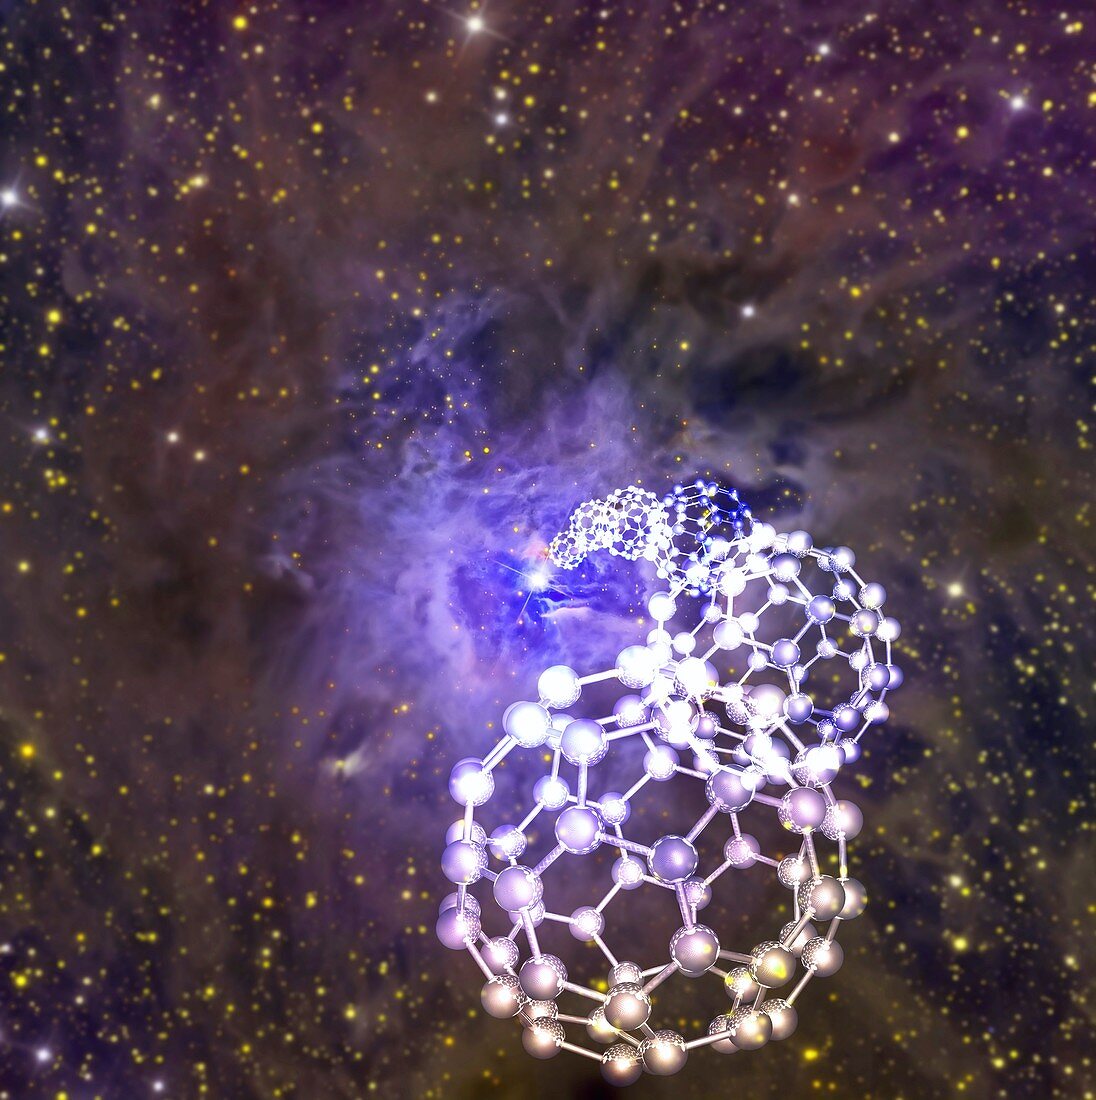 Buckyballs discovered in space, illustration